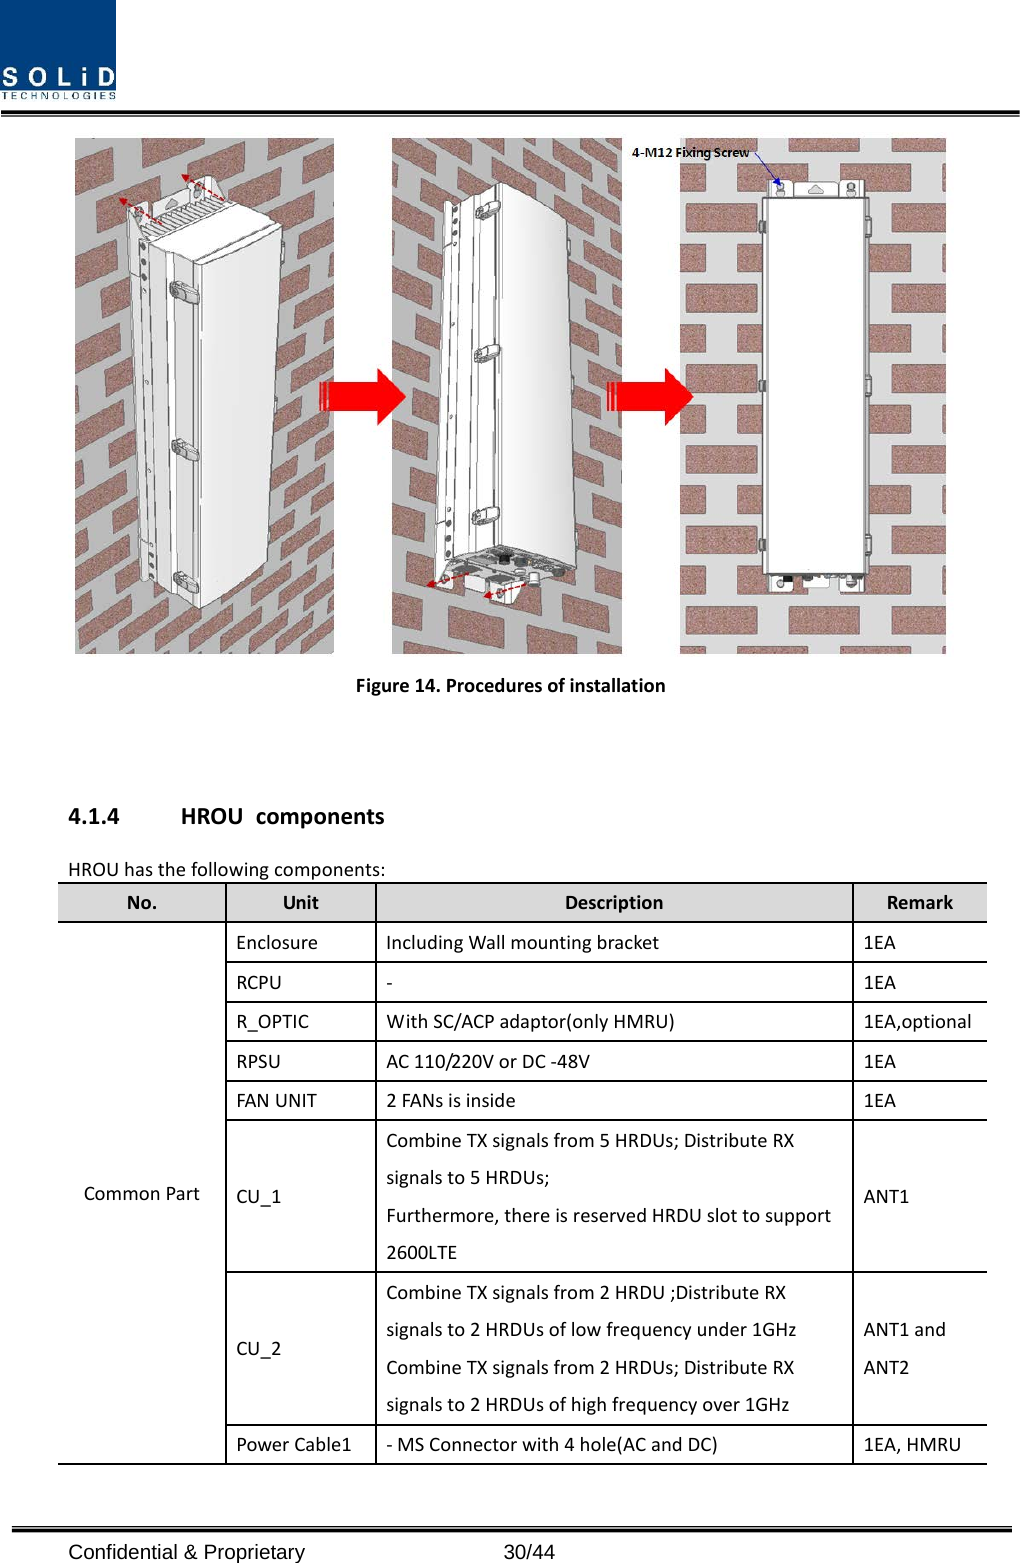   Figure 14. Procedures of installation   4.1.4 HROU components HROU has the following components: No. Unit Description Remark Common Part Enclosure Including Wall mounting bracket 1EA RCPU  -  1EA R_OPTIC With SC/ACP adaptor(only HMRU) 1EA,optional RPSU AC 110/220V or DC -48V 1EA FAN UNIT 2 FANs is inside 1EA CU_1 Combine TX signals from 5 HRDUs; Distribute RX signals to 5 HRDUs; Furthermore, there is reserved HRDU slot to support 2600LTE ANT1 CU_2 Combine TX signals from 2 HRDU ;Distribute RX signals to 2 HRDUs of low frequency under 1GHz   Combine TX signals from 2 HRDUs; Distribute RX signals to 2 HRDUs of high frequency over 1GHz   ANT1 and ANT2 Power Cable1  - MS Connector with 4 hole(AC and DC)  1EA, HMRU Confidential &amp; Proprietary                   30/44 